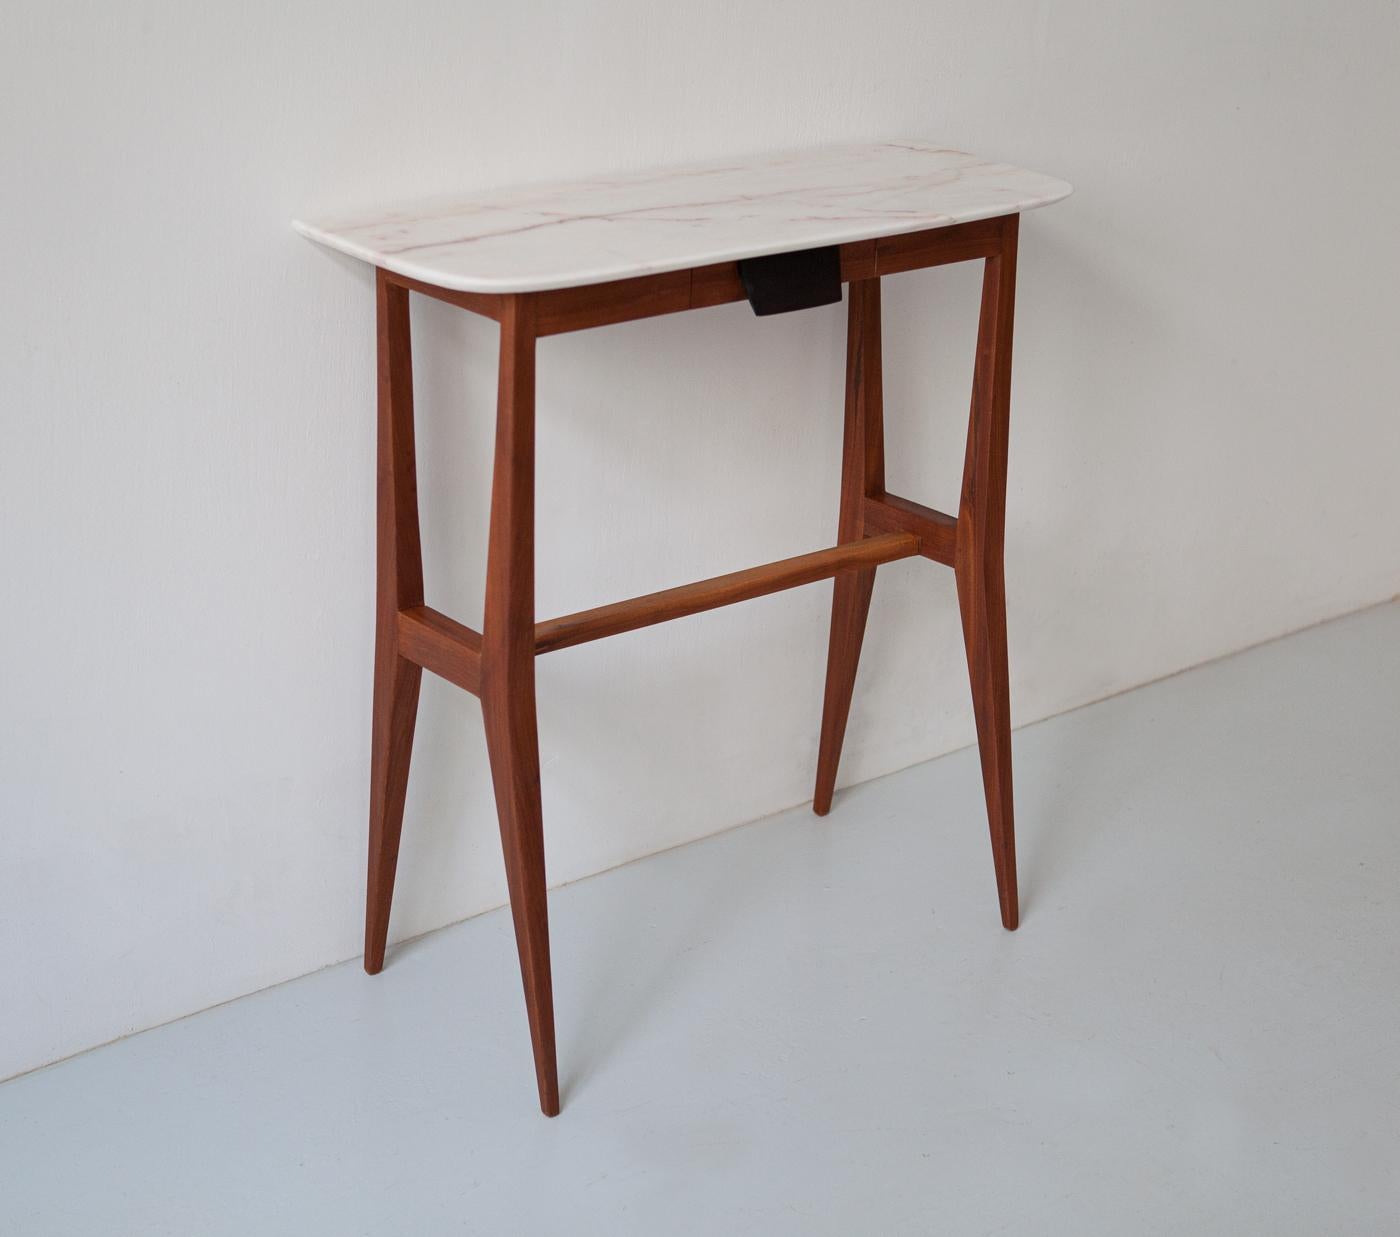 Mid-Century Modern Italian Console Table, Mahogany Wood with Marble Top, 1950s